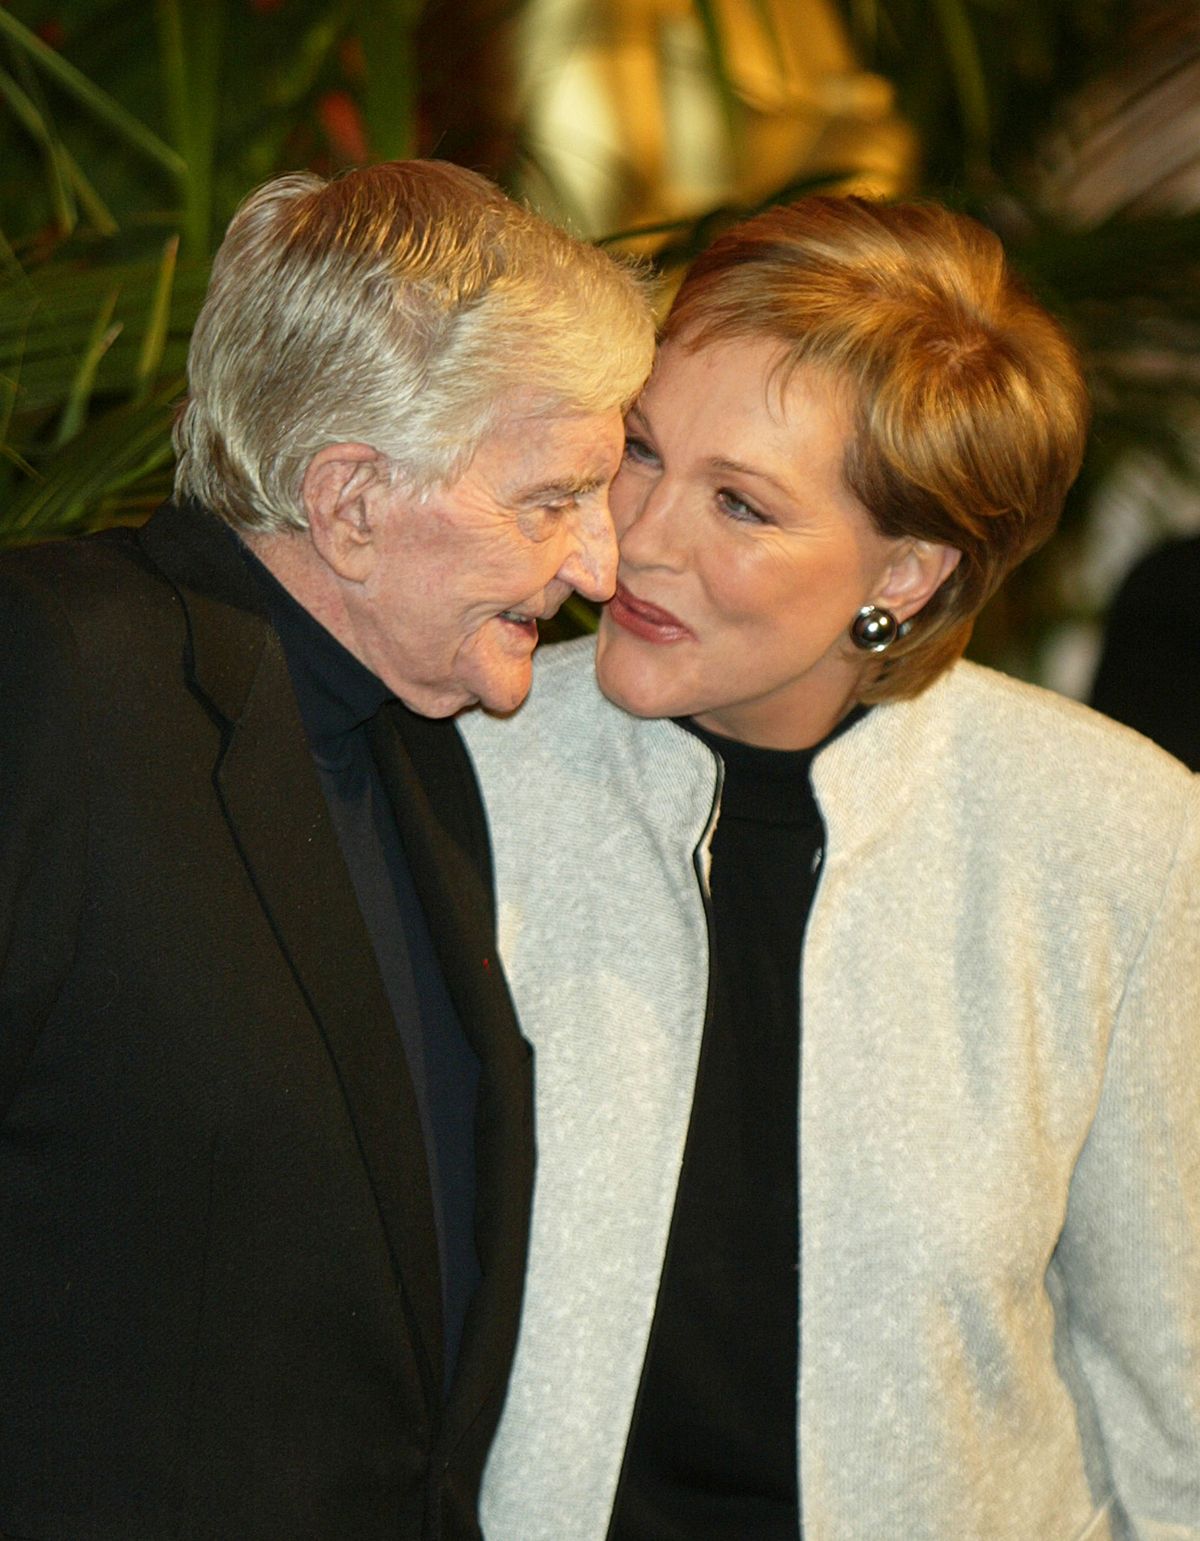 Blake Edwards and Julie Andrews at the Academy of Motion Pictures Arts and Sciences 23rd Annual Nominees Luncheon on February 9, 2004, in Beverly Hills, California. | Source: Kevin Winter/Getty Images